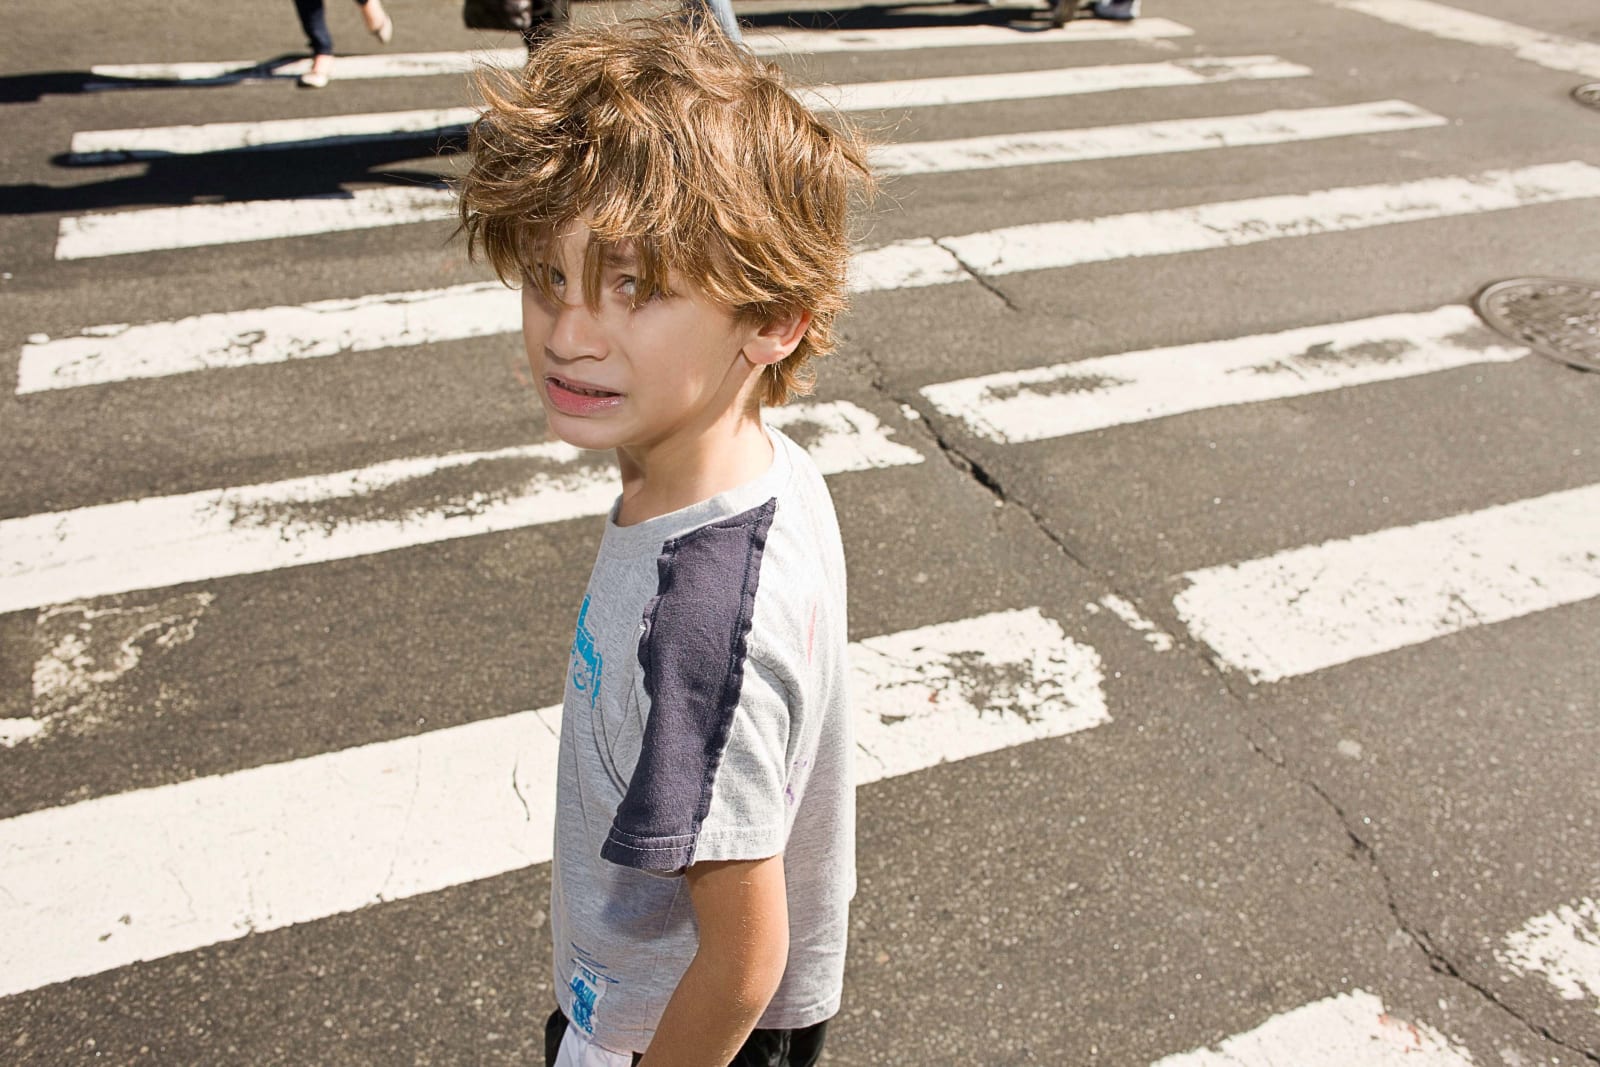 Elinor Carucci photograph of the artist's son about to cross the street